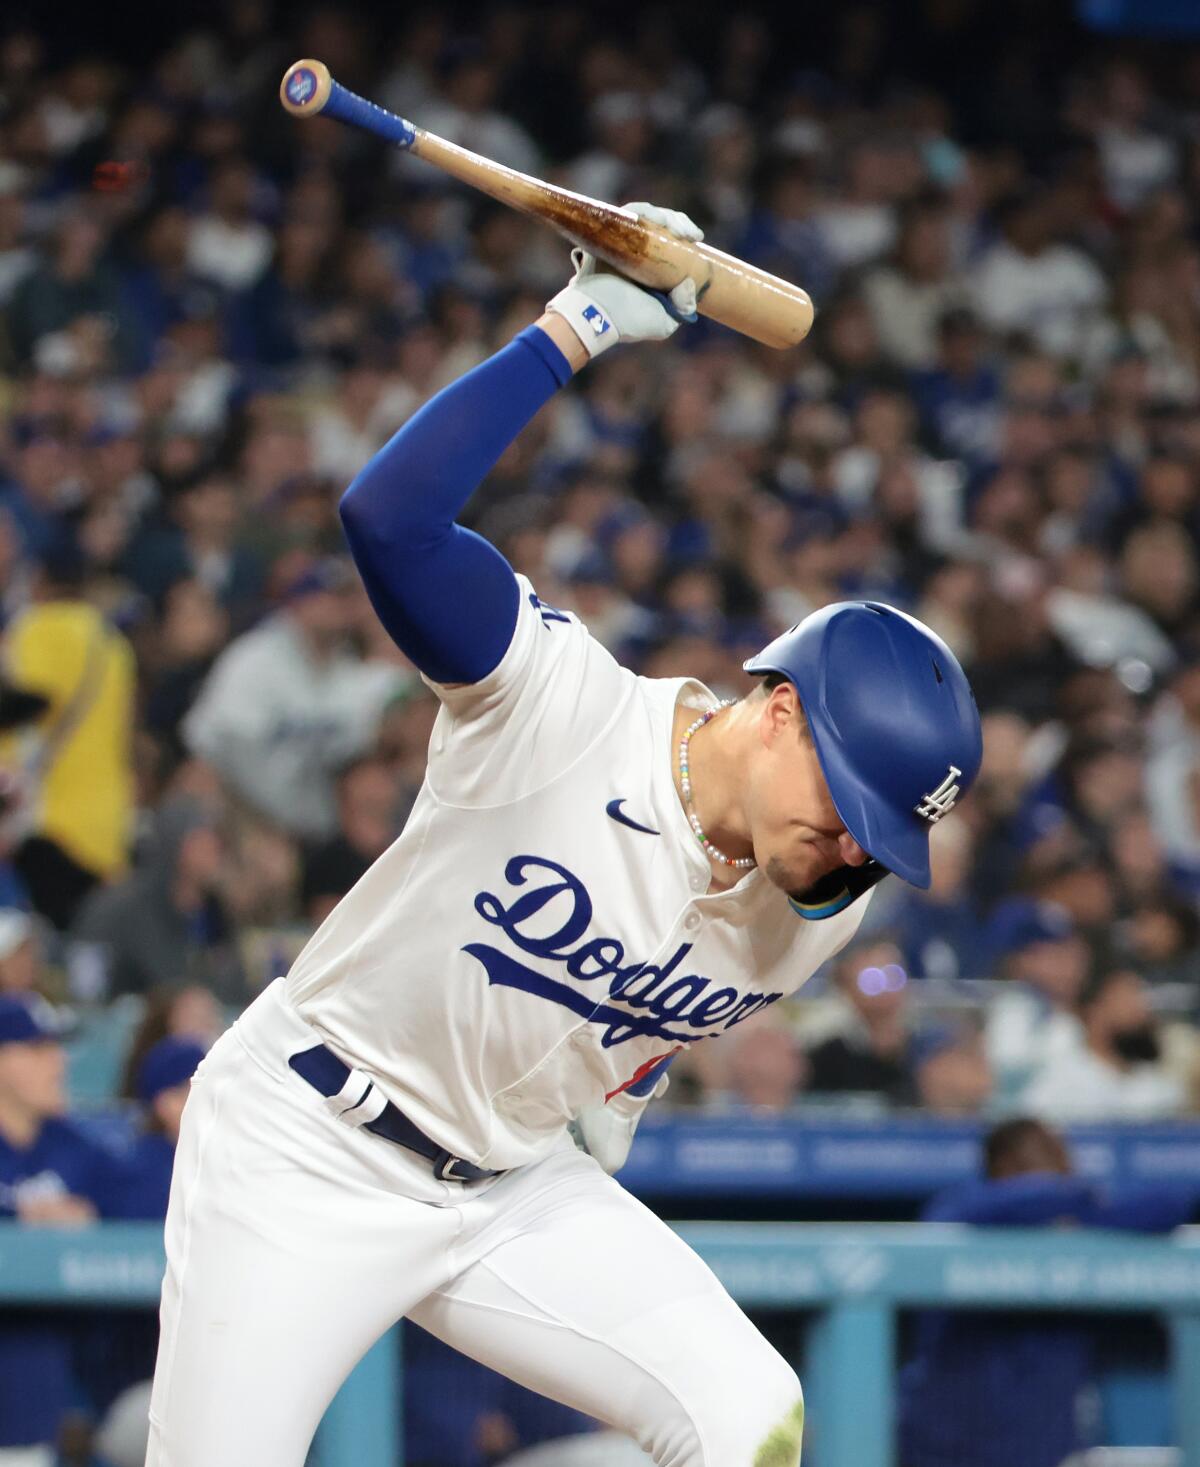 Kiké Hernández throws his bat is disgust after popping out against the Mets in the fourth inning Friday.